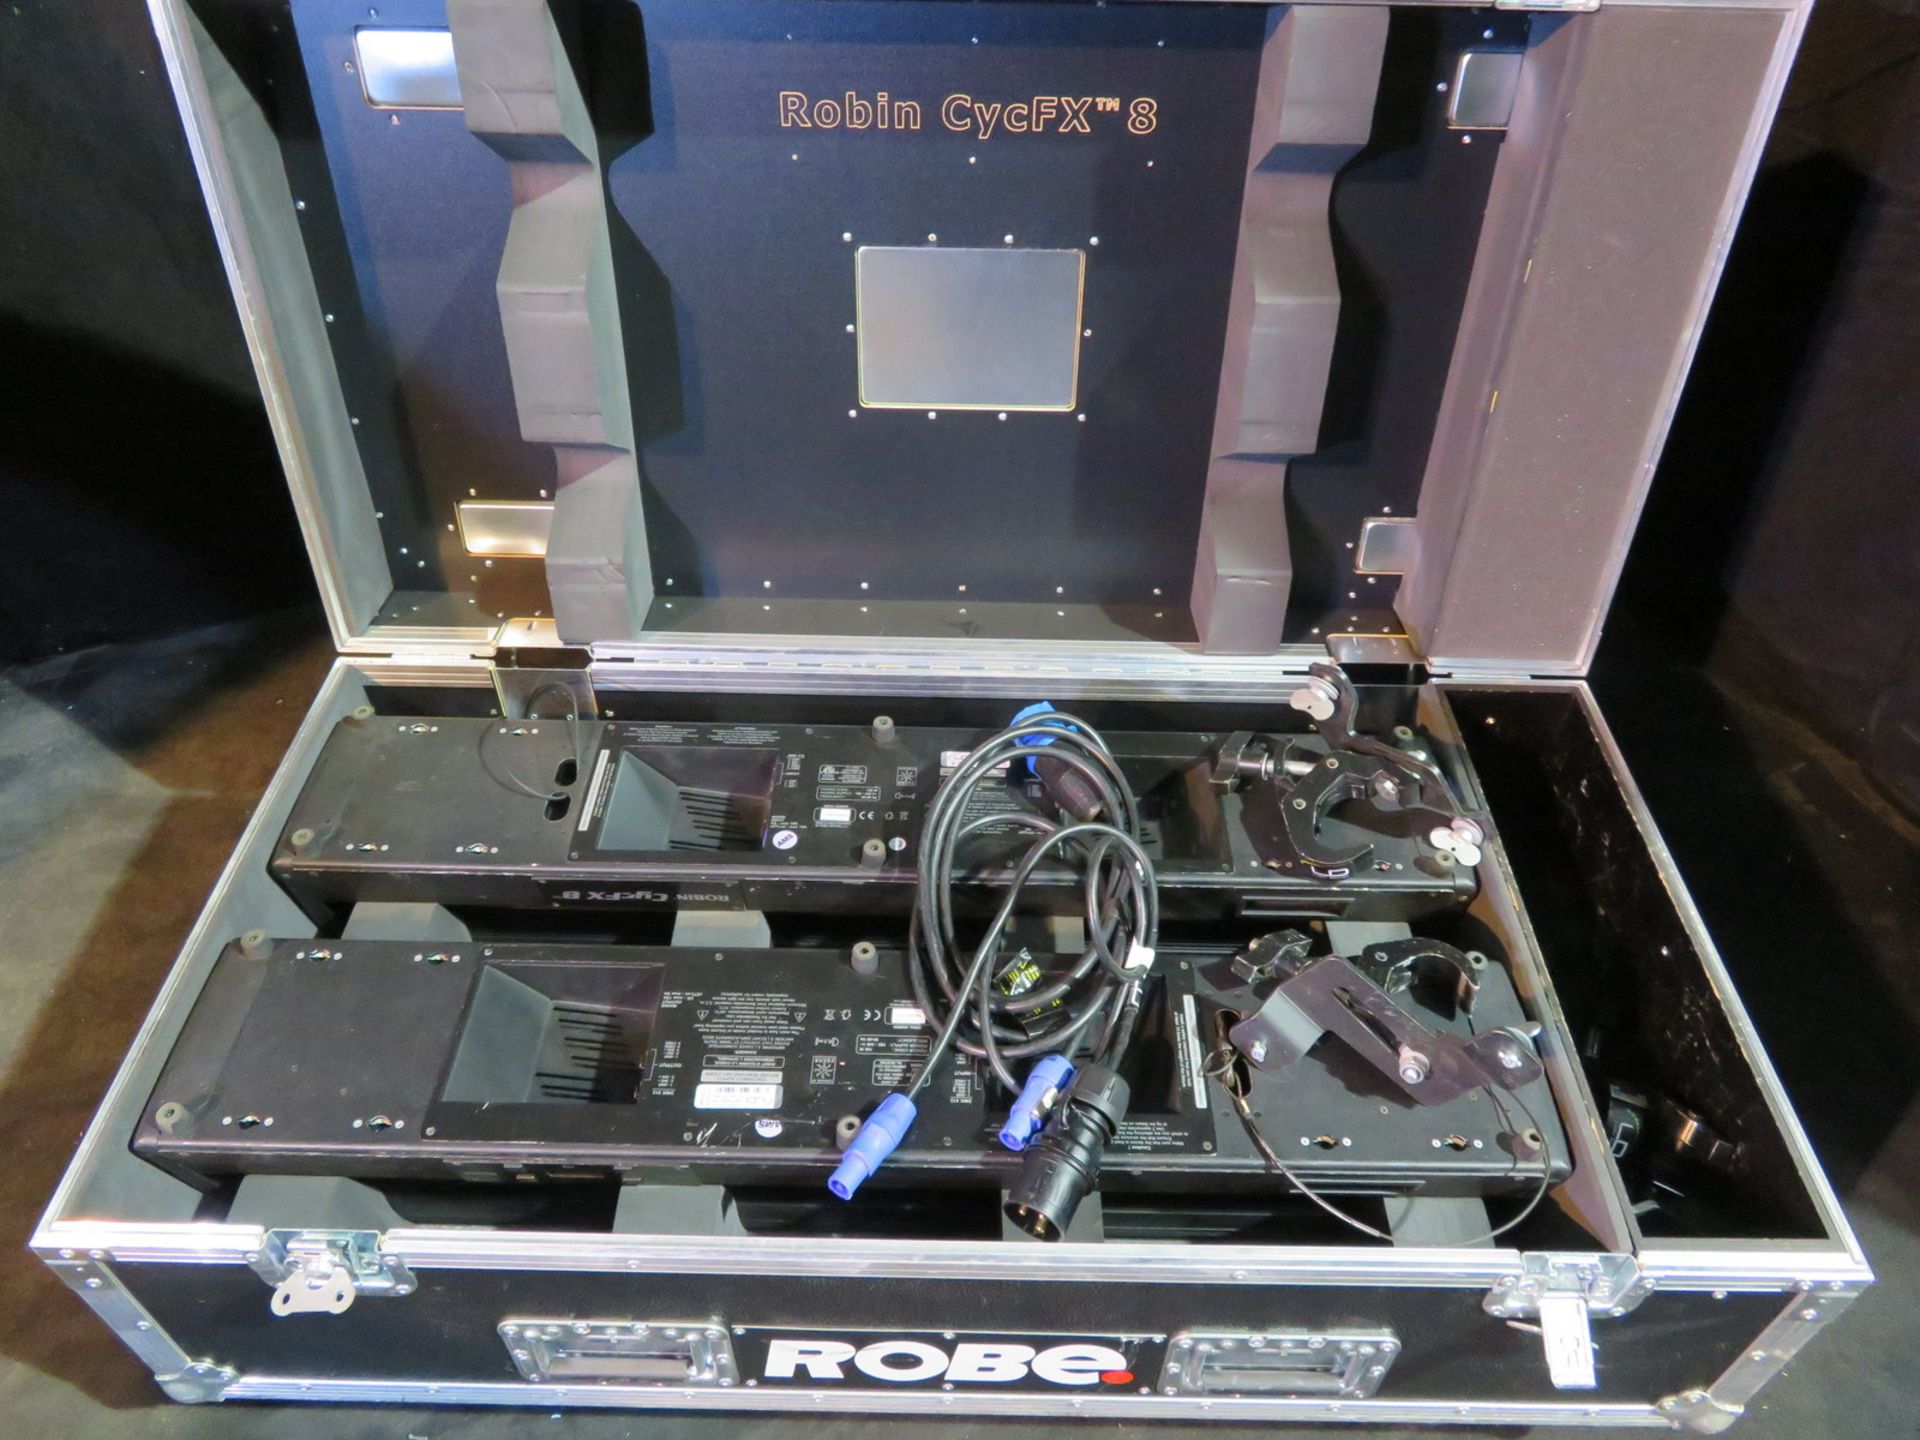 Pair of Robe CycFX8 in twin flightcase - Power hours: 9984 & 9848 - working - Image 7 of 9